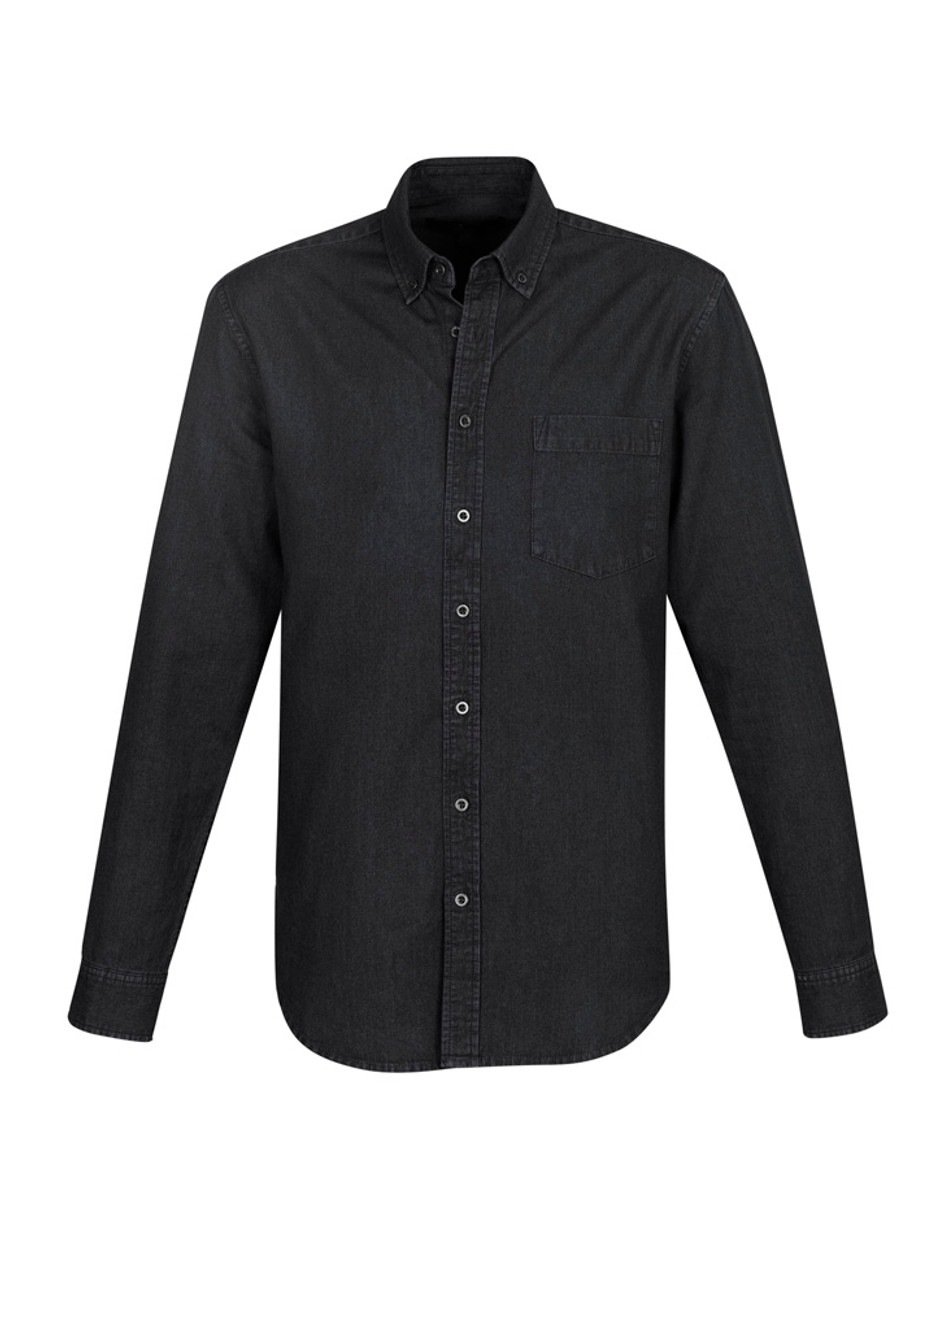 Biz Collection S017ML Mens Indie Long Sleeve Shirt | Available Colours: Black, Blue, Dark Blue